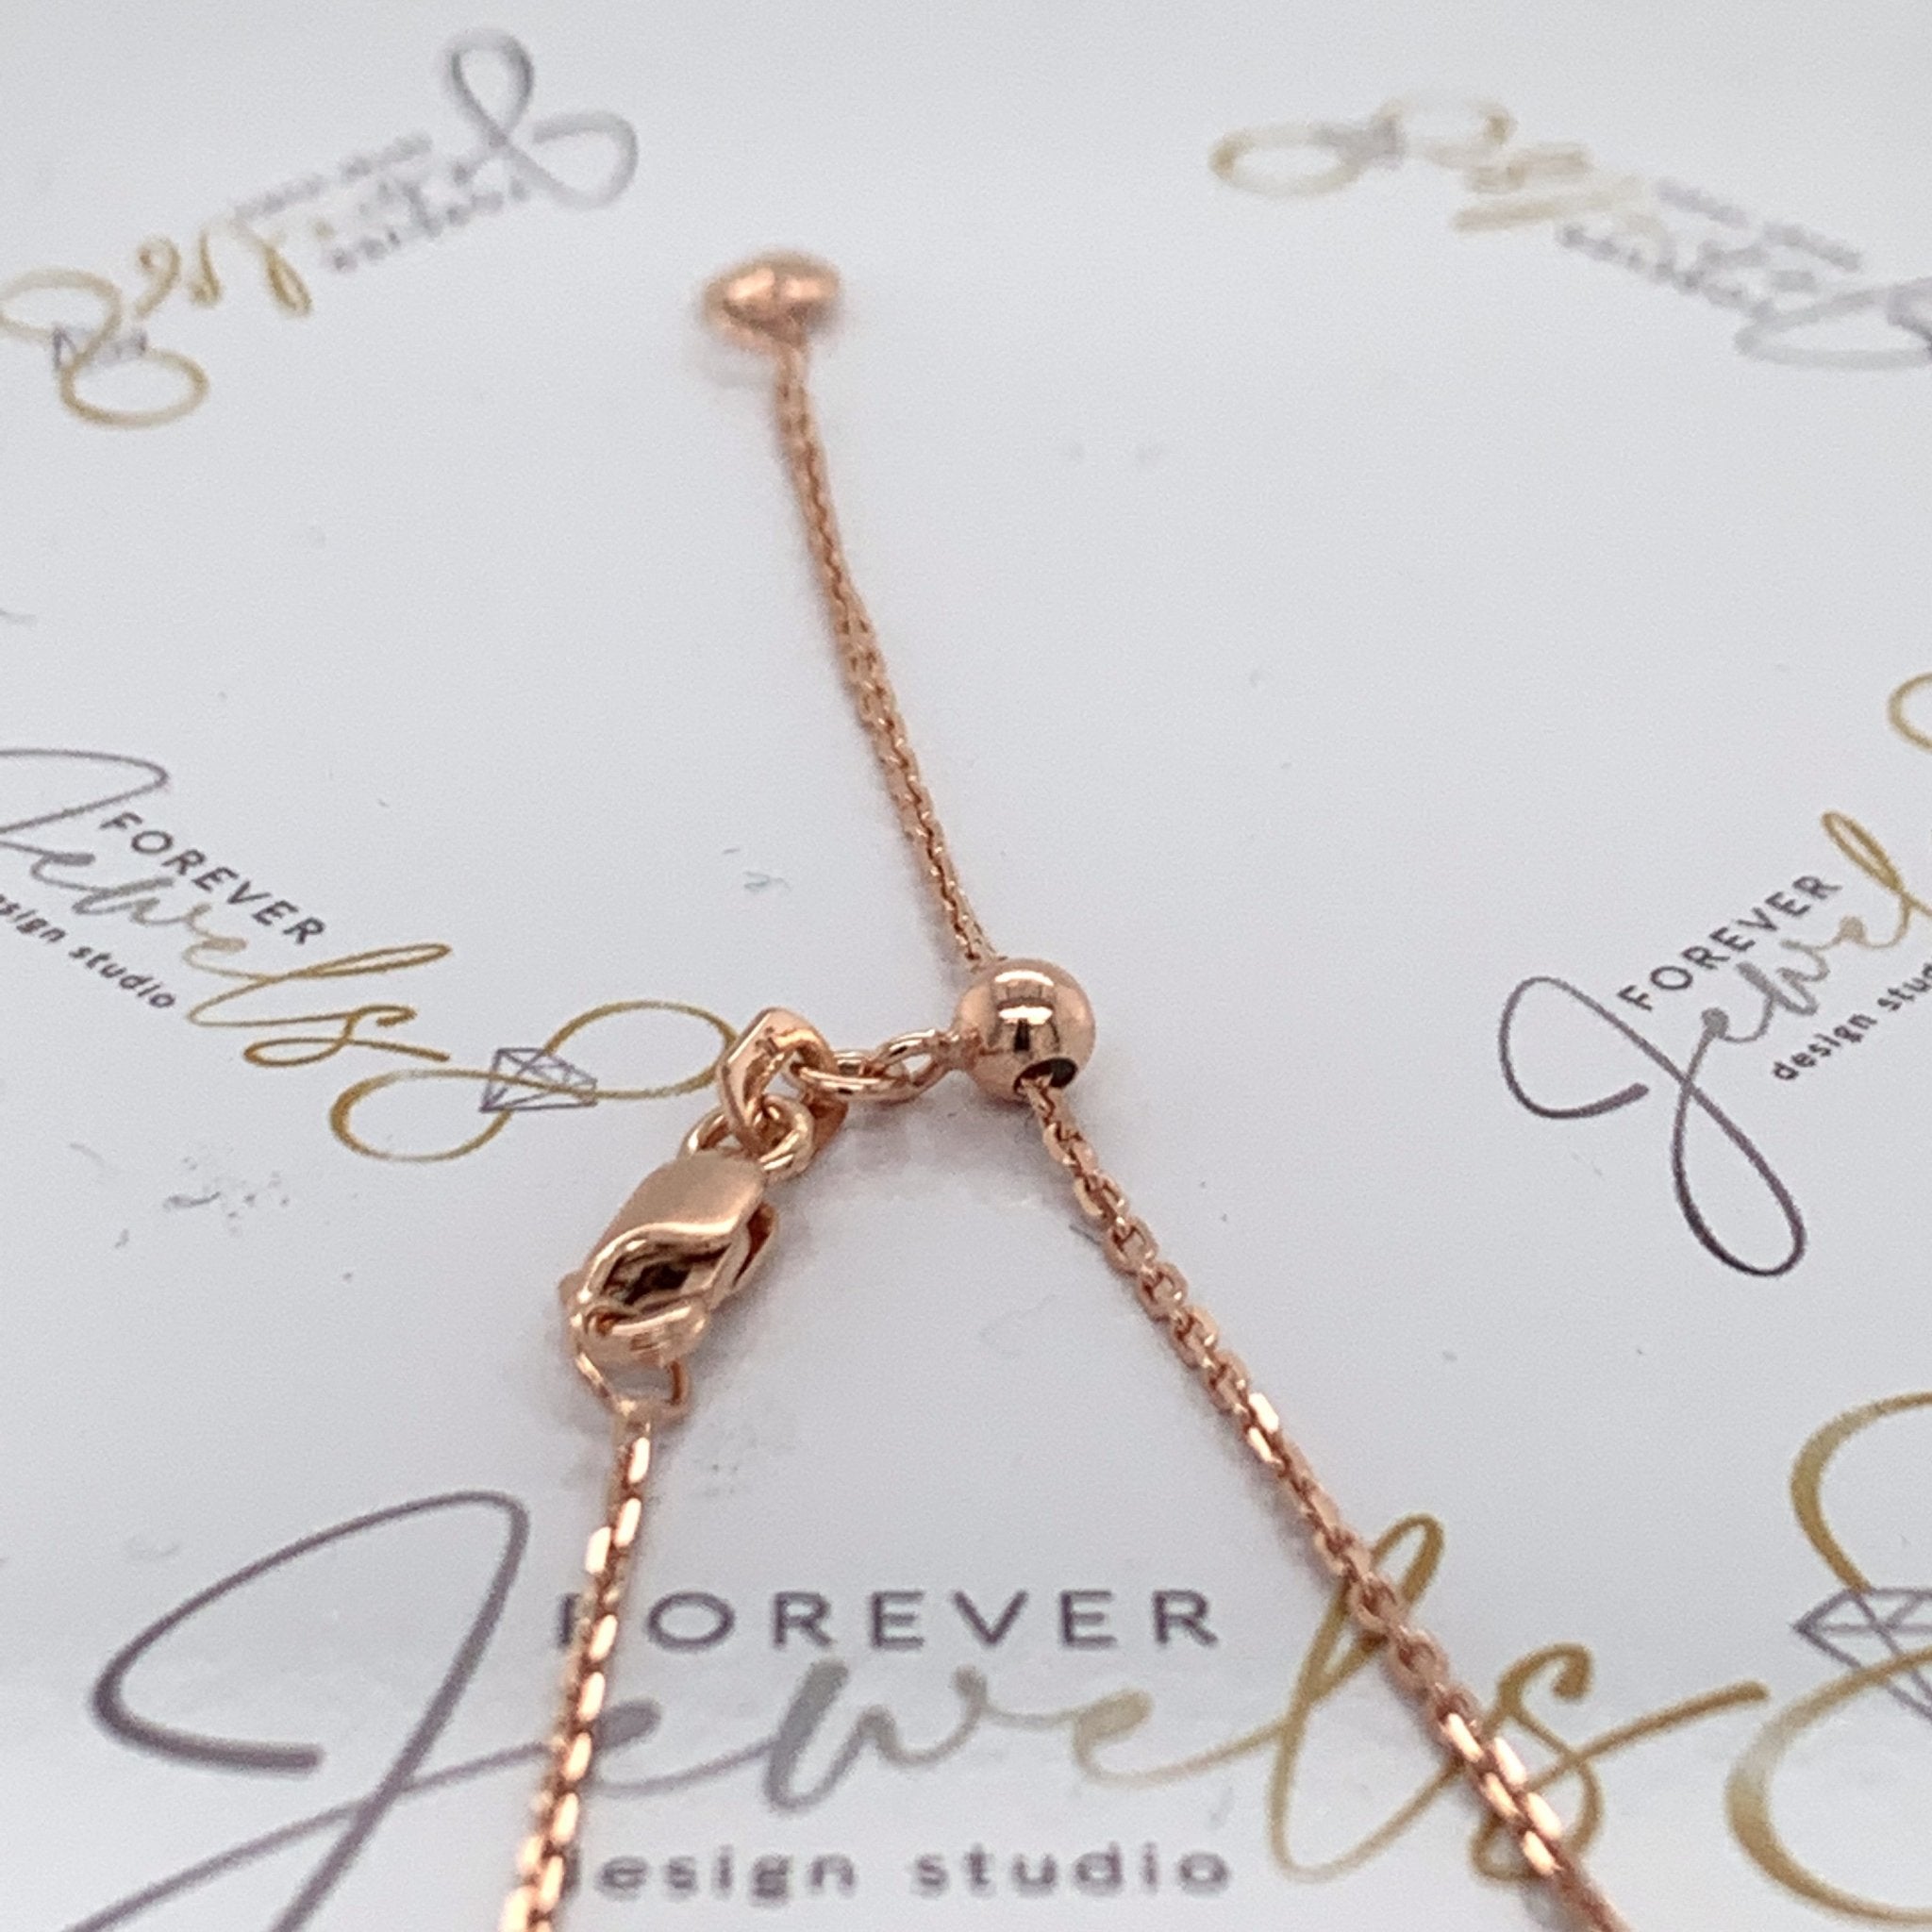 GOLD WORD AND CHARM 'LOVE' NECKLACE GOLD - ForeverJewels Design Studio 8